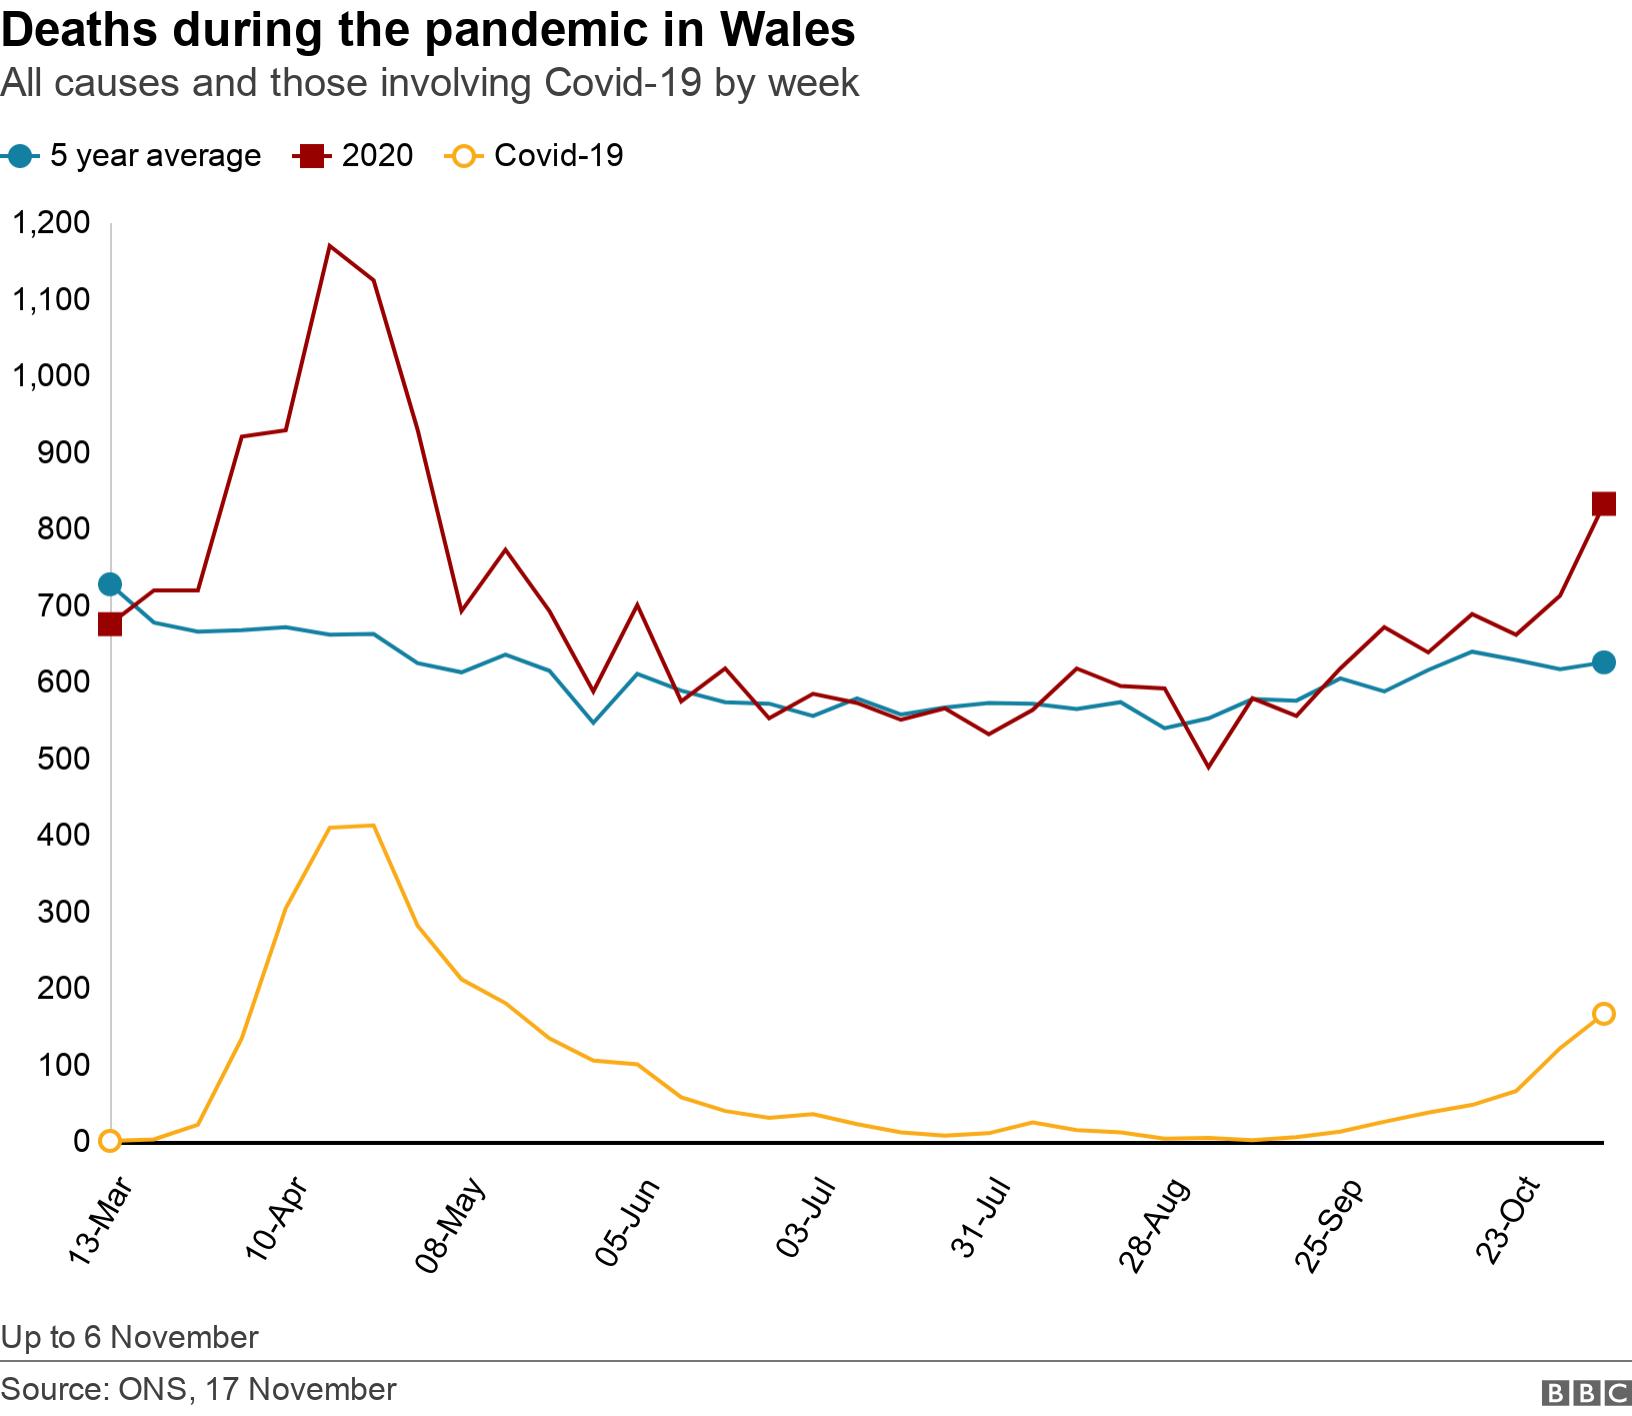 Deaths during the pandemic in Wales. All causes and those involving Covid-19 by week. Up to 6 November.